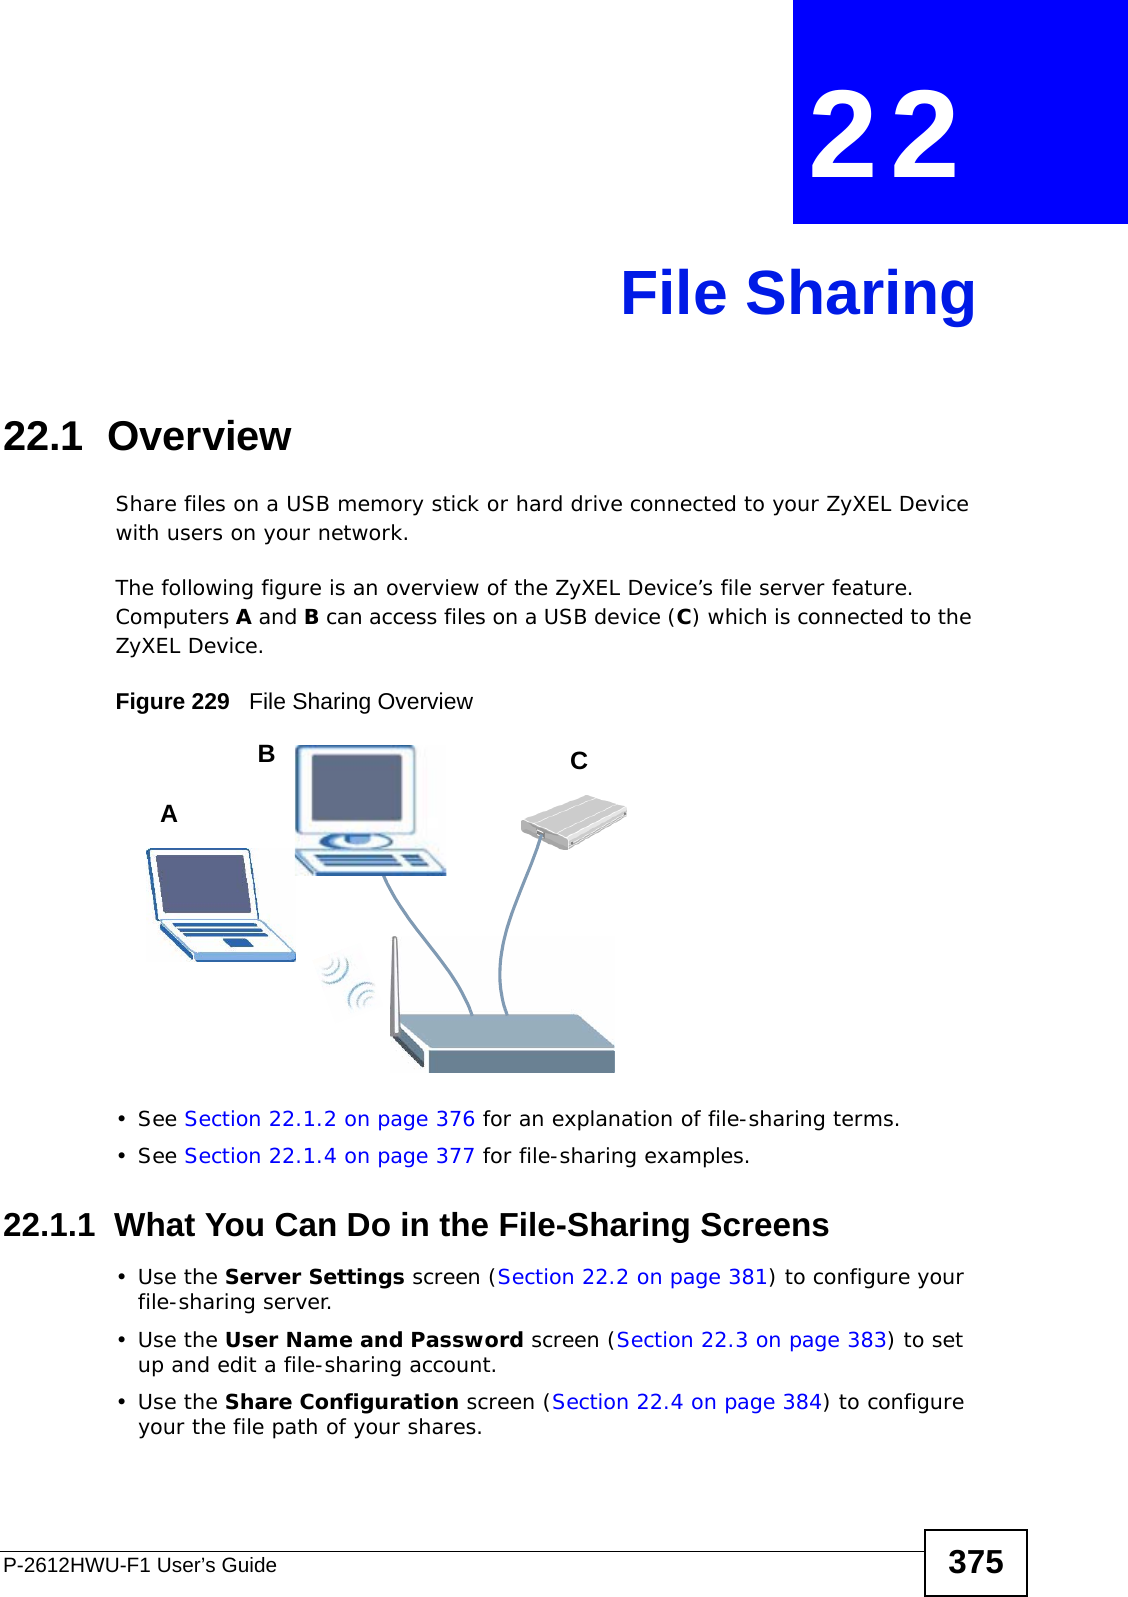 P-2612HWU-F1 User’s Guide 375CHAPTER  22 File Sharing22.1  OverviewShare files on a USB memory stick or hard drive connected to your ZyXEL Device with users on your network. The following figure is an overview of the ZyXEL Device’s file server feature. Computers A and B can access files on a USB device (C) which is connected to the ZyXEL Device.Figure 229   File Sharing Overview• See Section 22.1.2 on page 376 for an explanation of file-sharing terms.• See Section 22.1.4 on page 377 for file-sharing examples.22.1.1  What You Can Do in the File-Sharing Screens•Use the Server Settings screen (Section 22.2 on page 381) to configure your file-sharing server.•Use the User Name and Password screen (Section 22.3 on page 383) to set up and edit a file-sharing account.•Use the Share Configuration screen (Section 22.4 on page 384) to configure your the file path of your shares.ABC